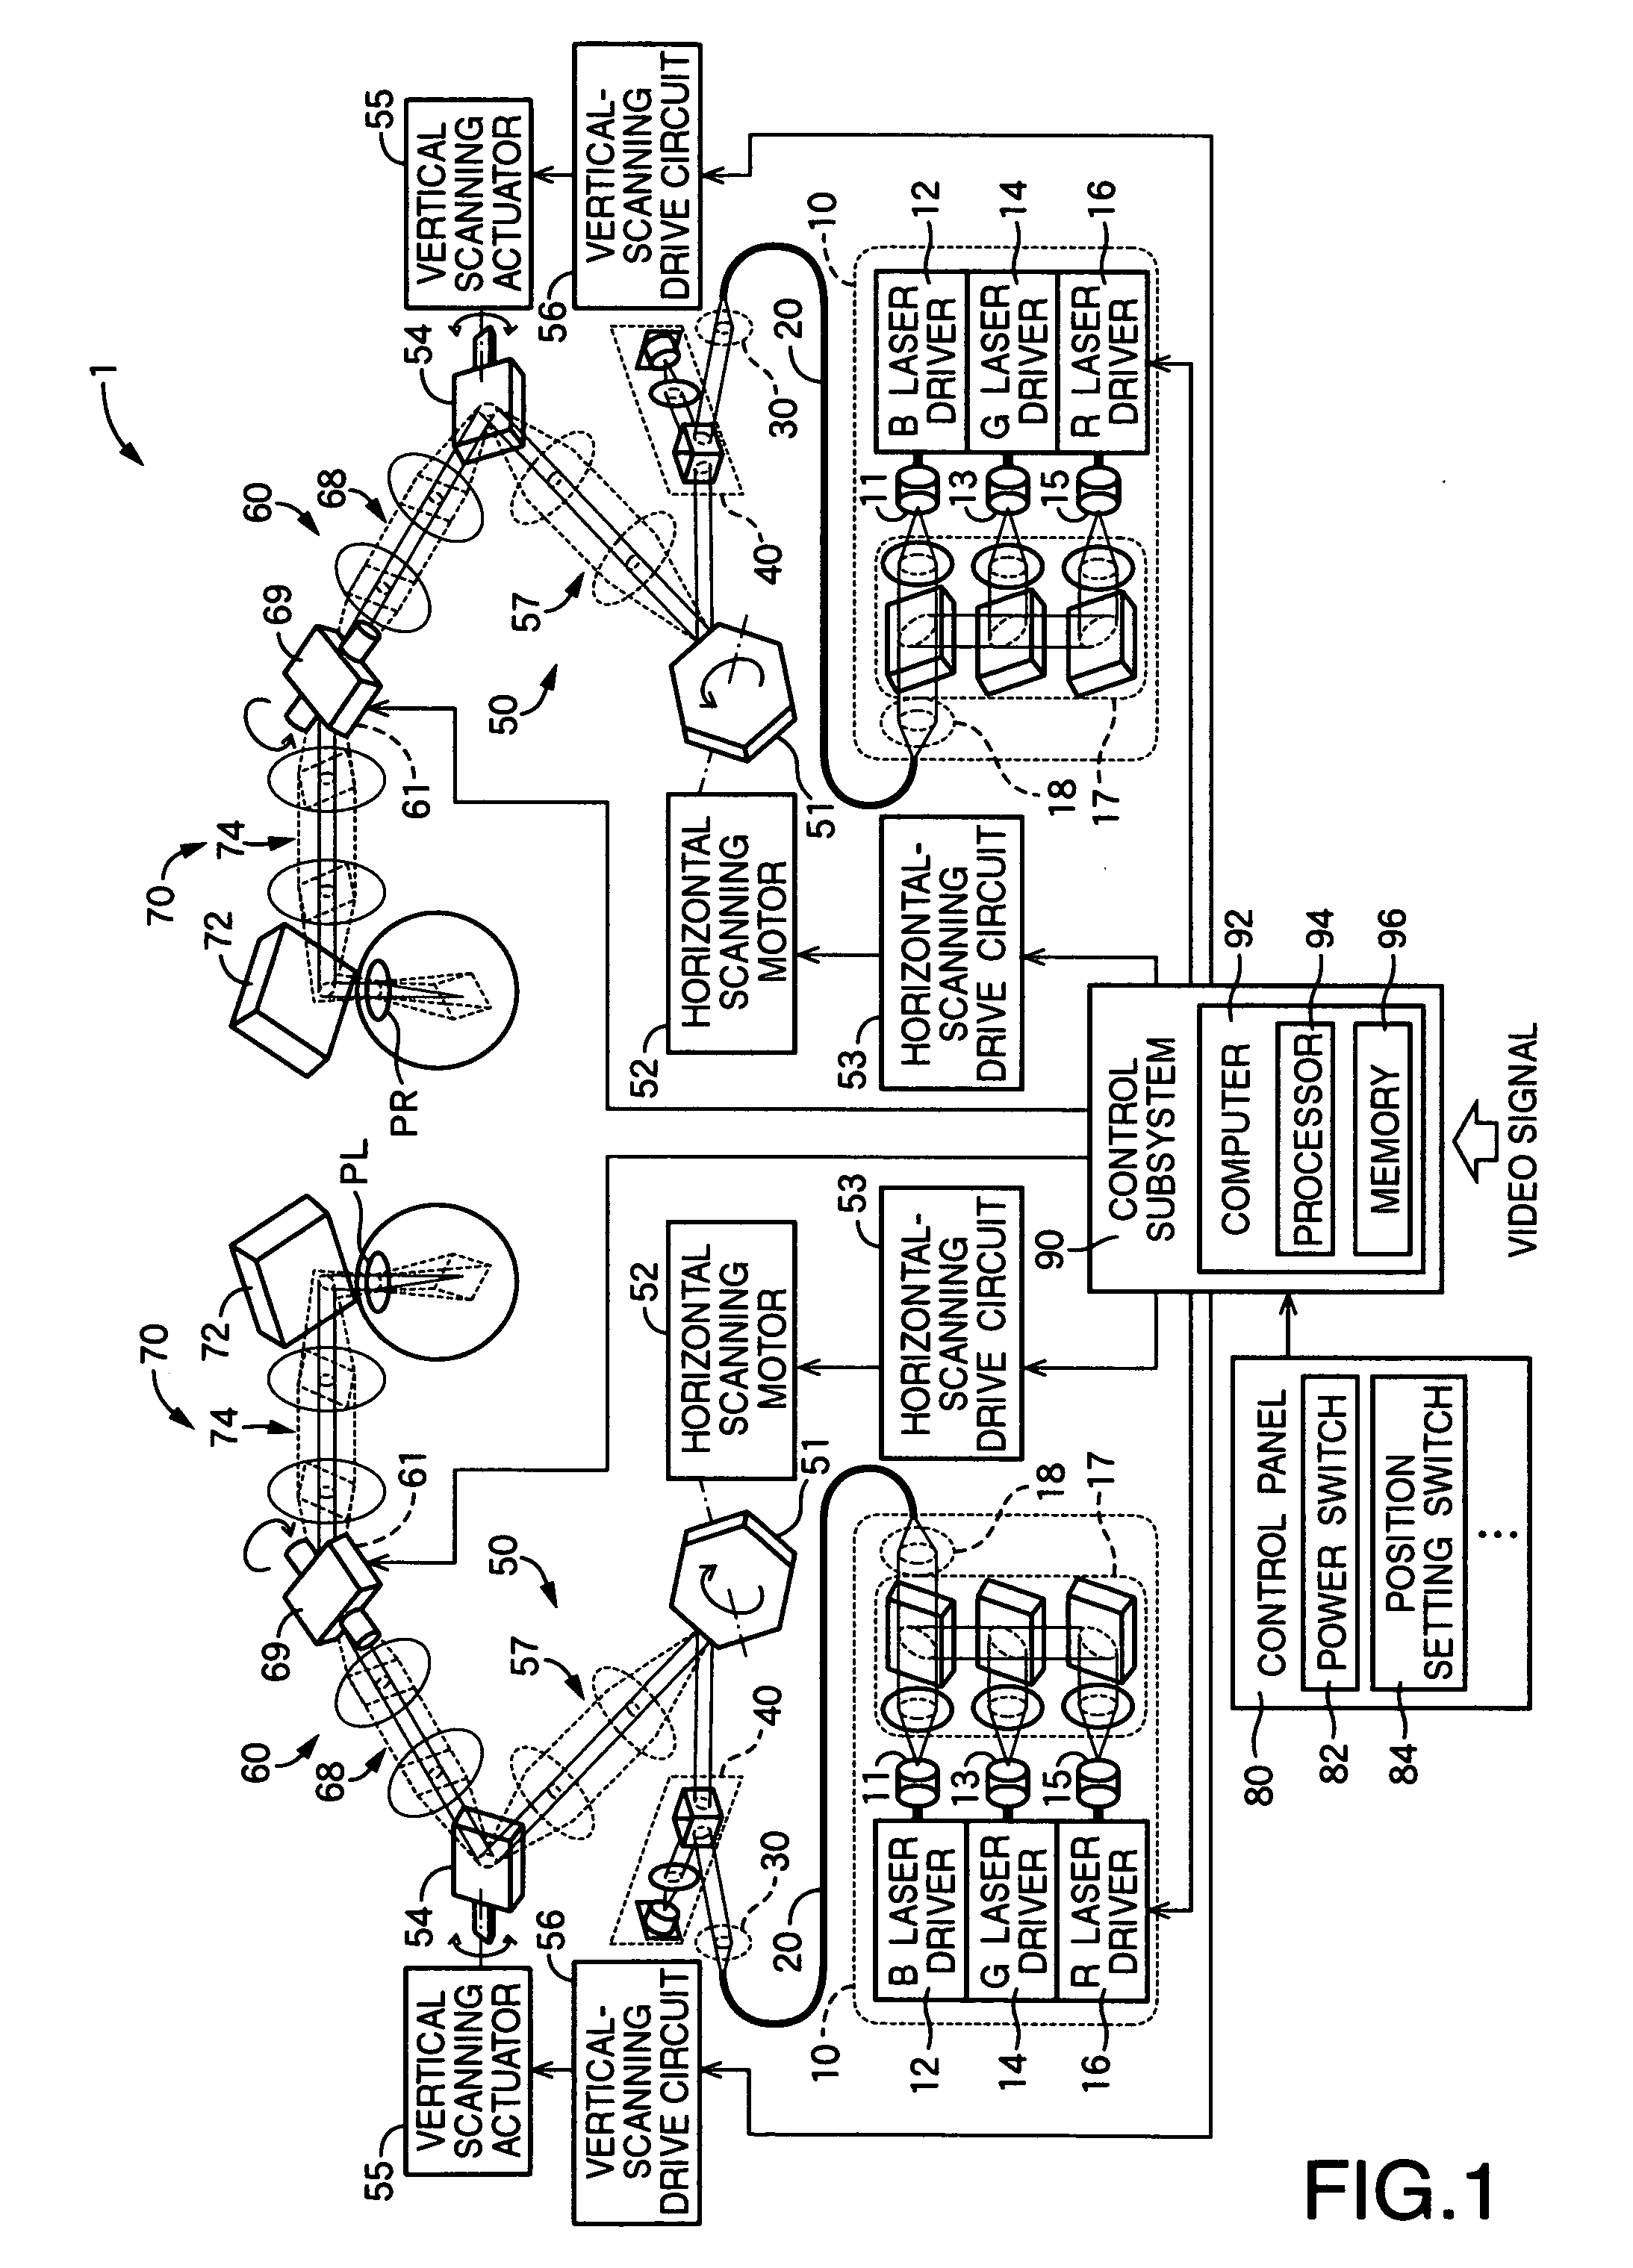 Image display apparatus for displaying image in variable direction relative to viewer